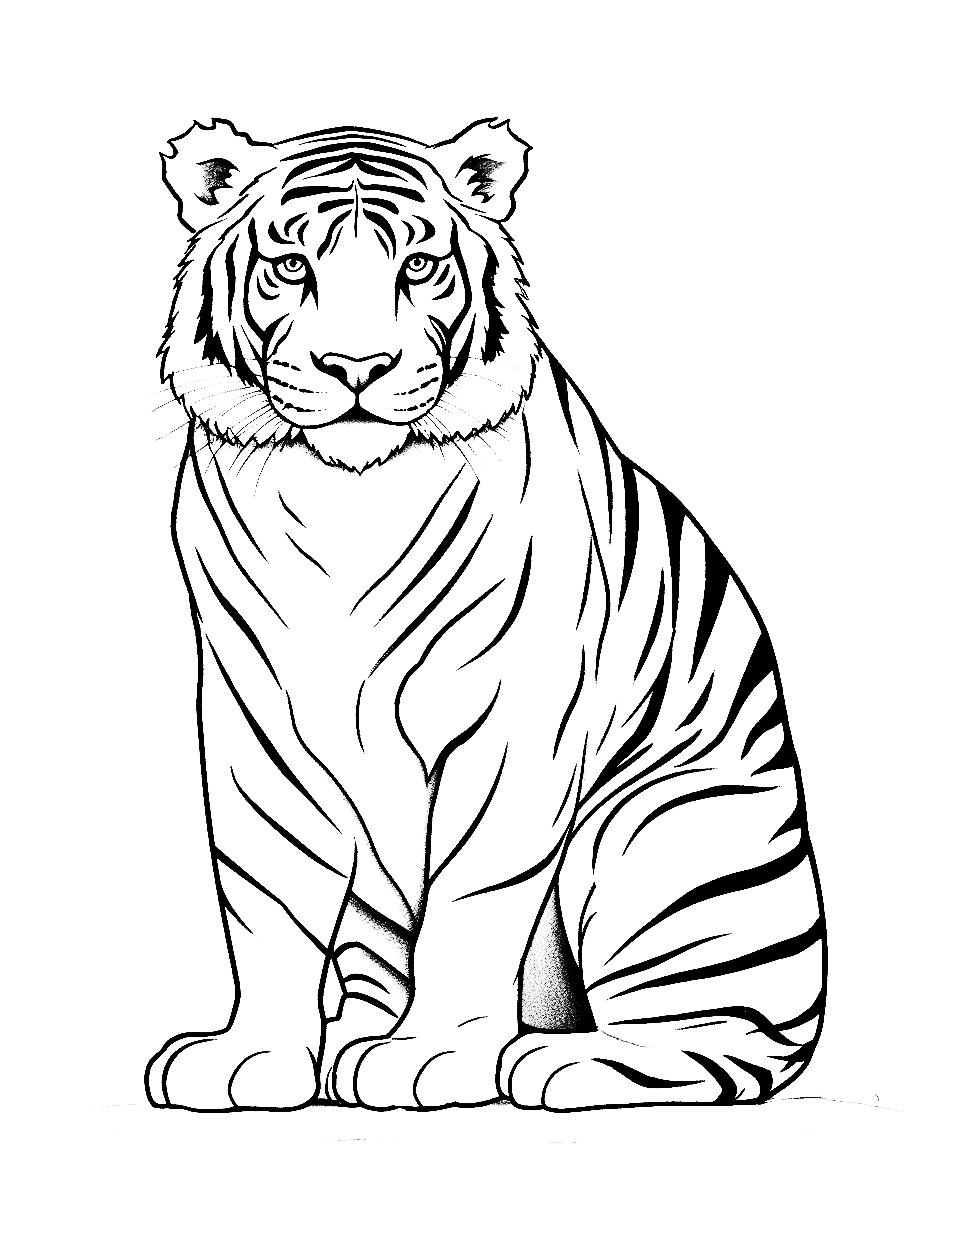 Sitting Proud Tiger Coloring Page - A regal tiger sitting with an air of authority.